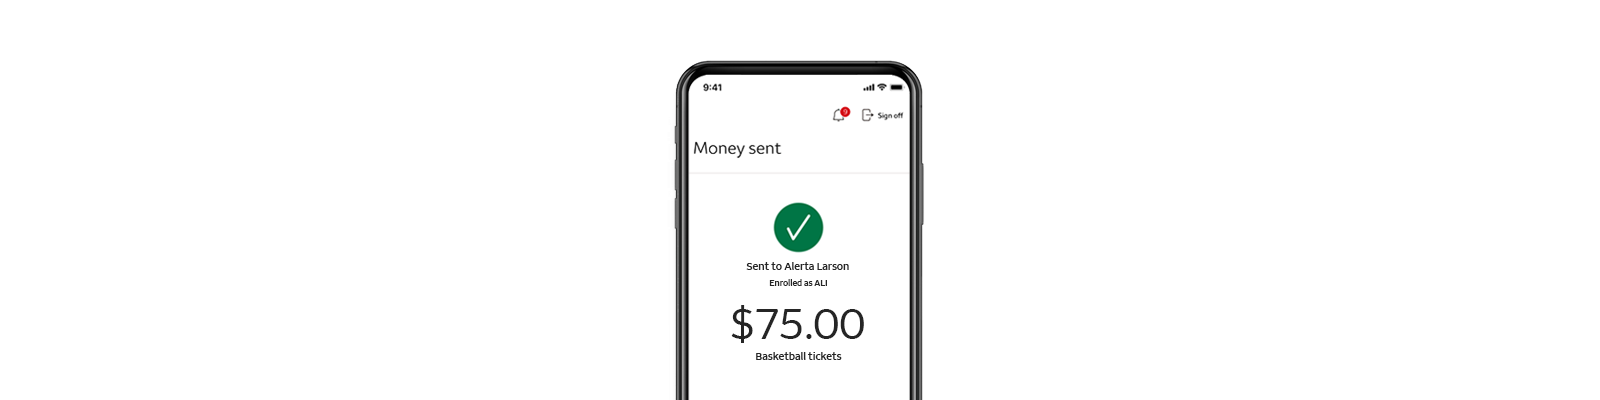 Wells Fargo app screen showing electronic payment of $75 basketball tickets